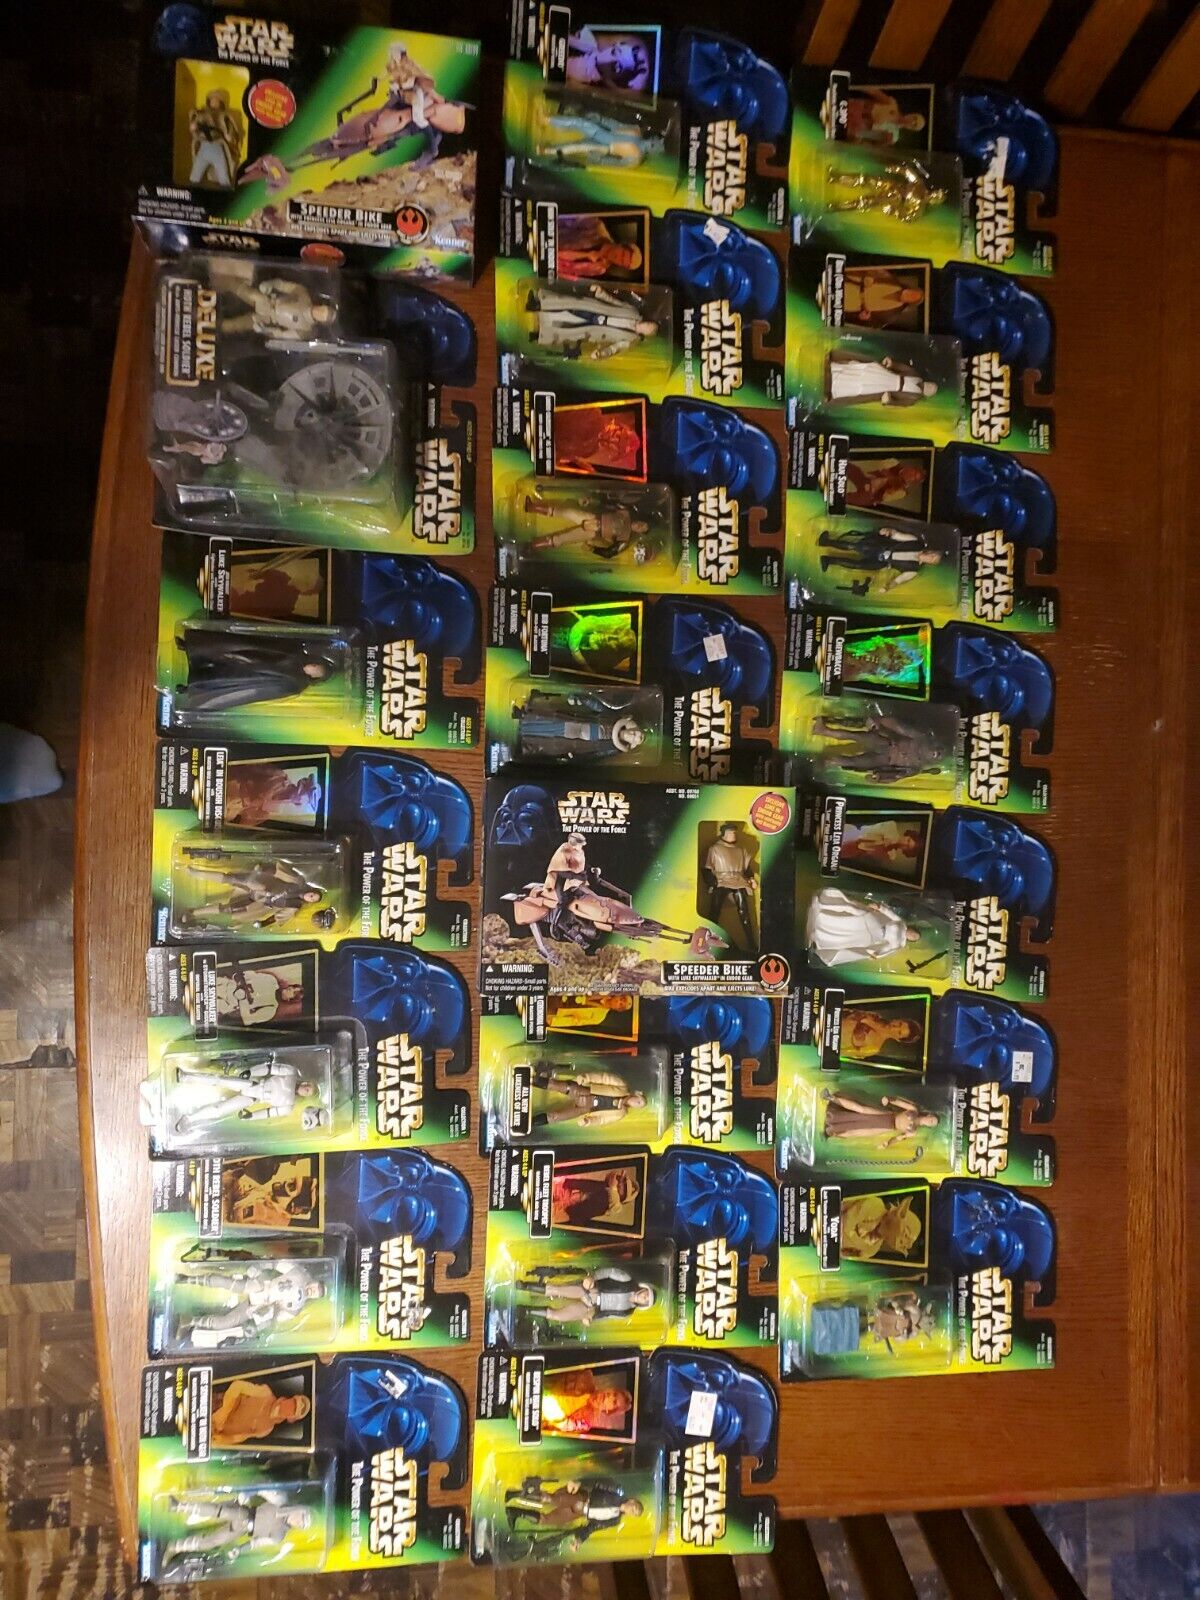 22 Star Wars Figures, Collection 1 OF THE POWER OF THE FORCE, New In Box kenner